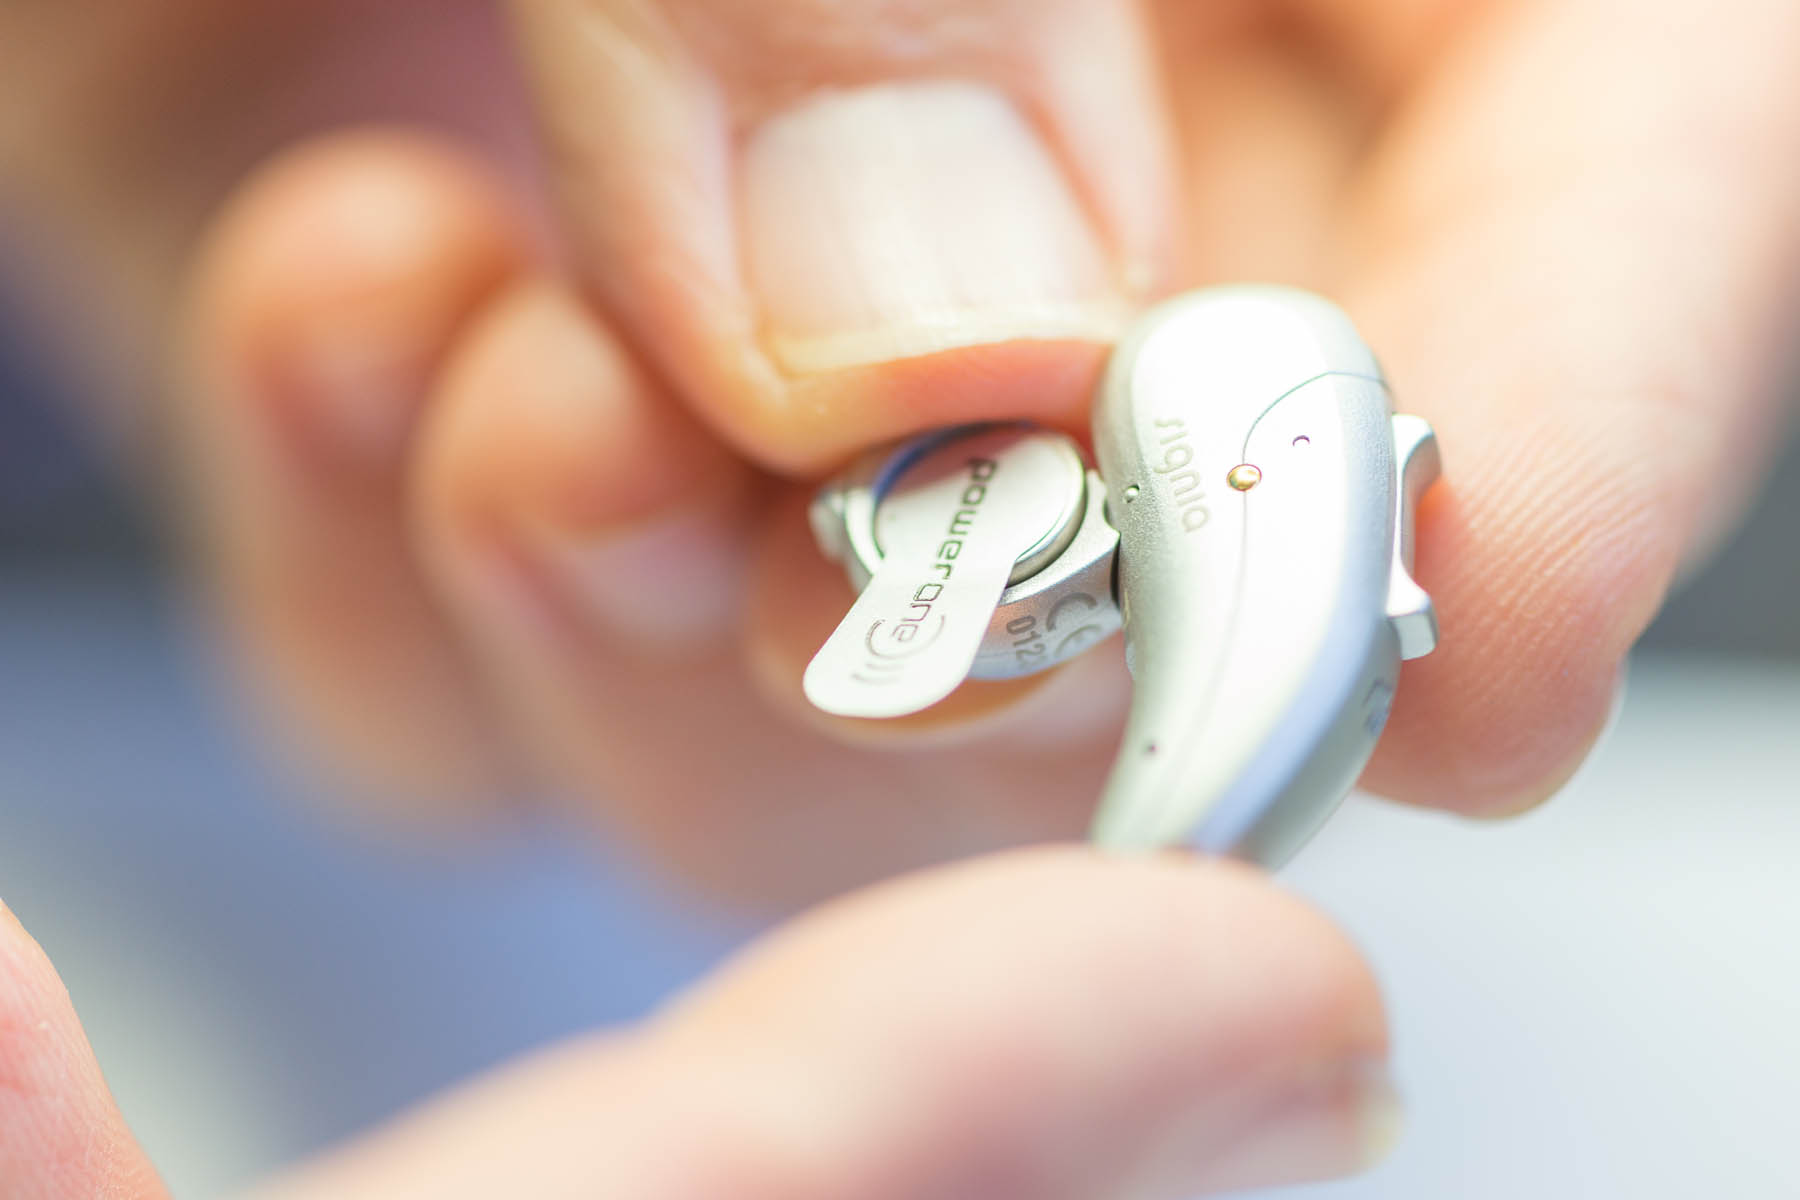 Hearing aids and market penetration